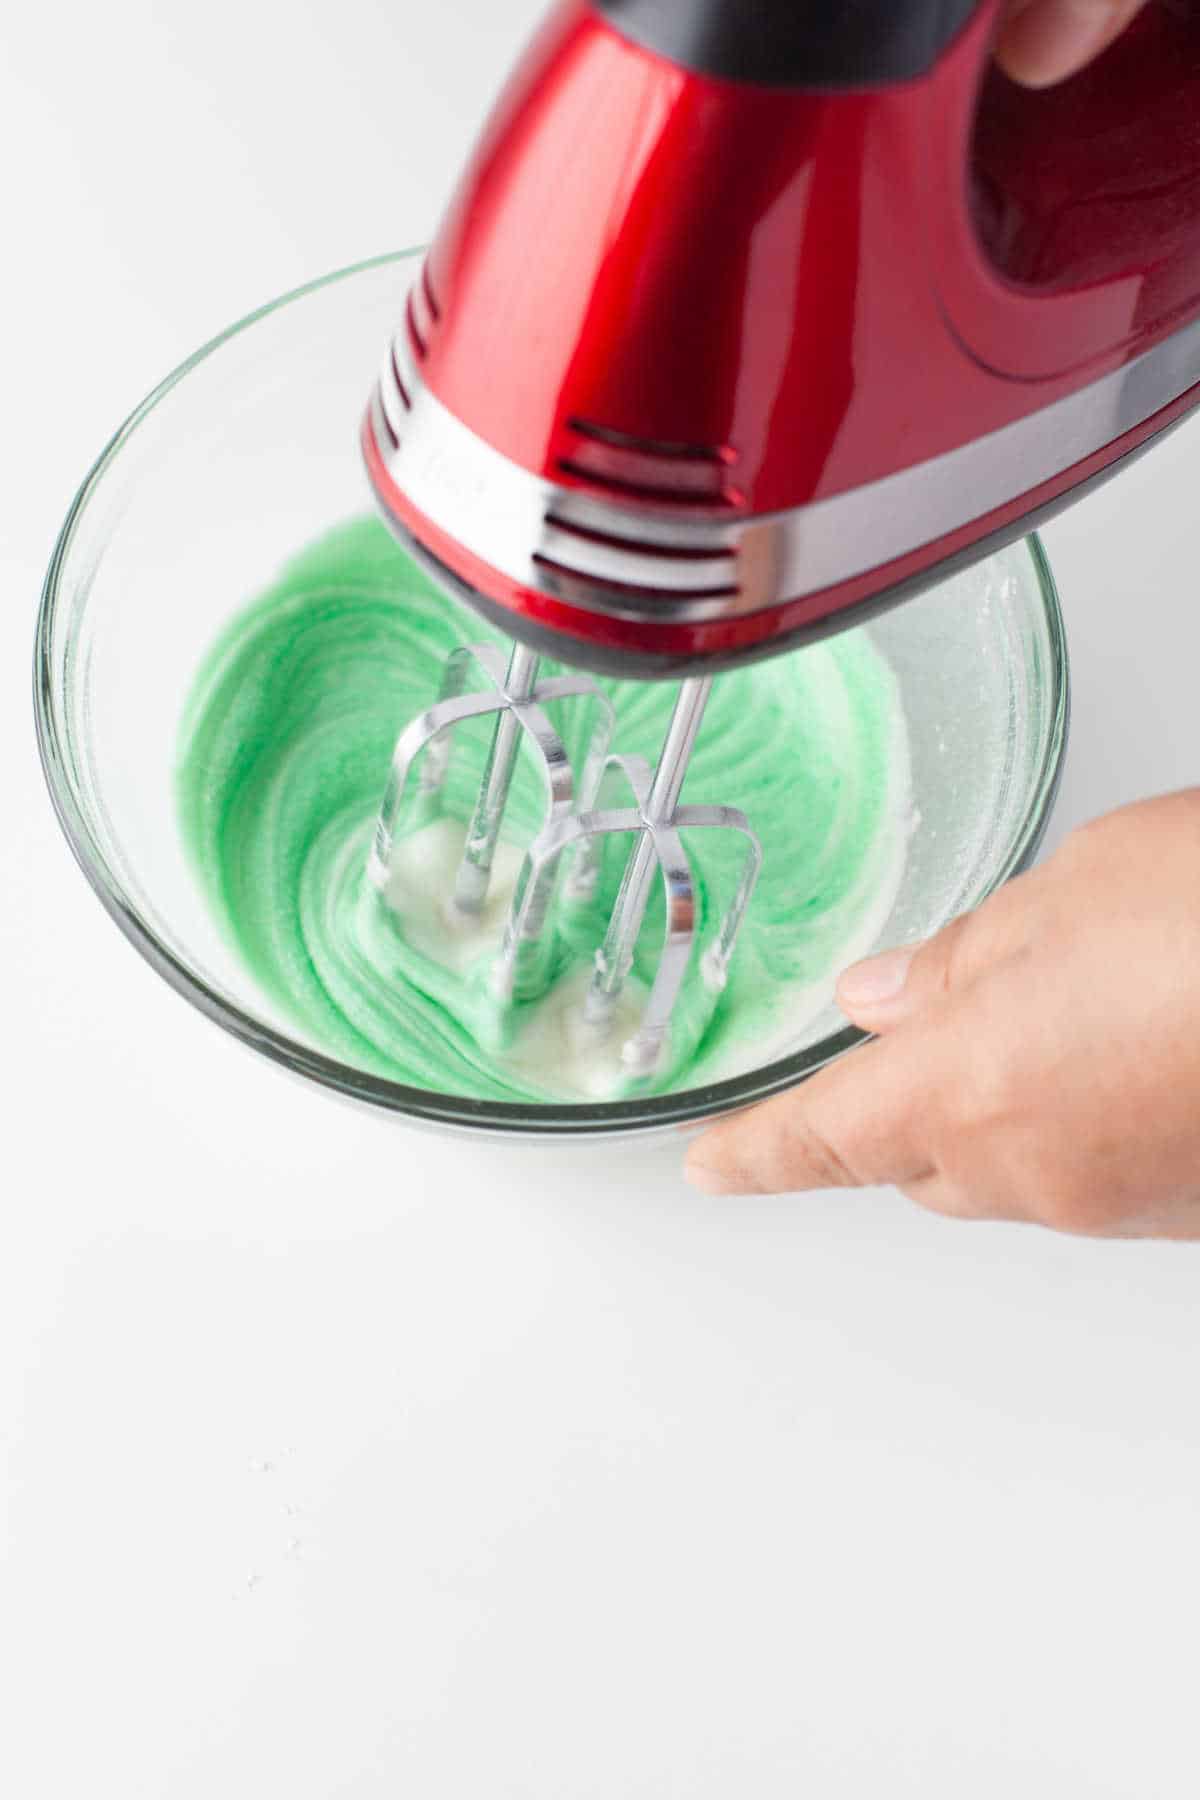 Green food coloring mixing into buttercream frosting. 